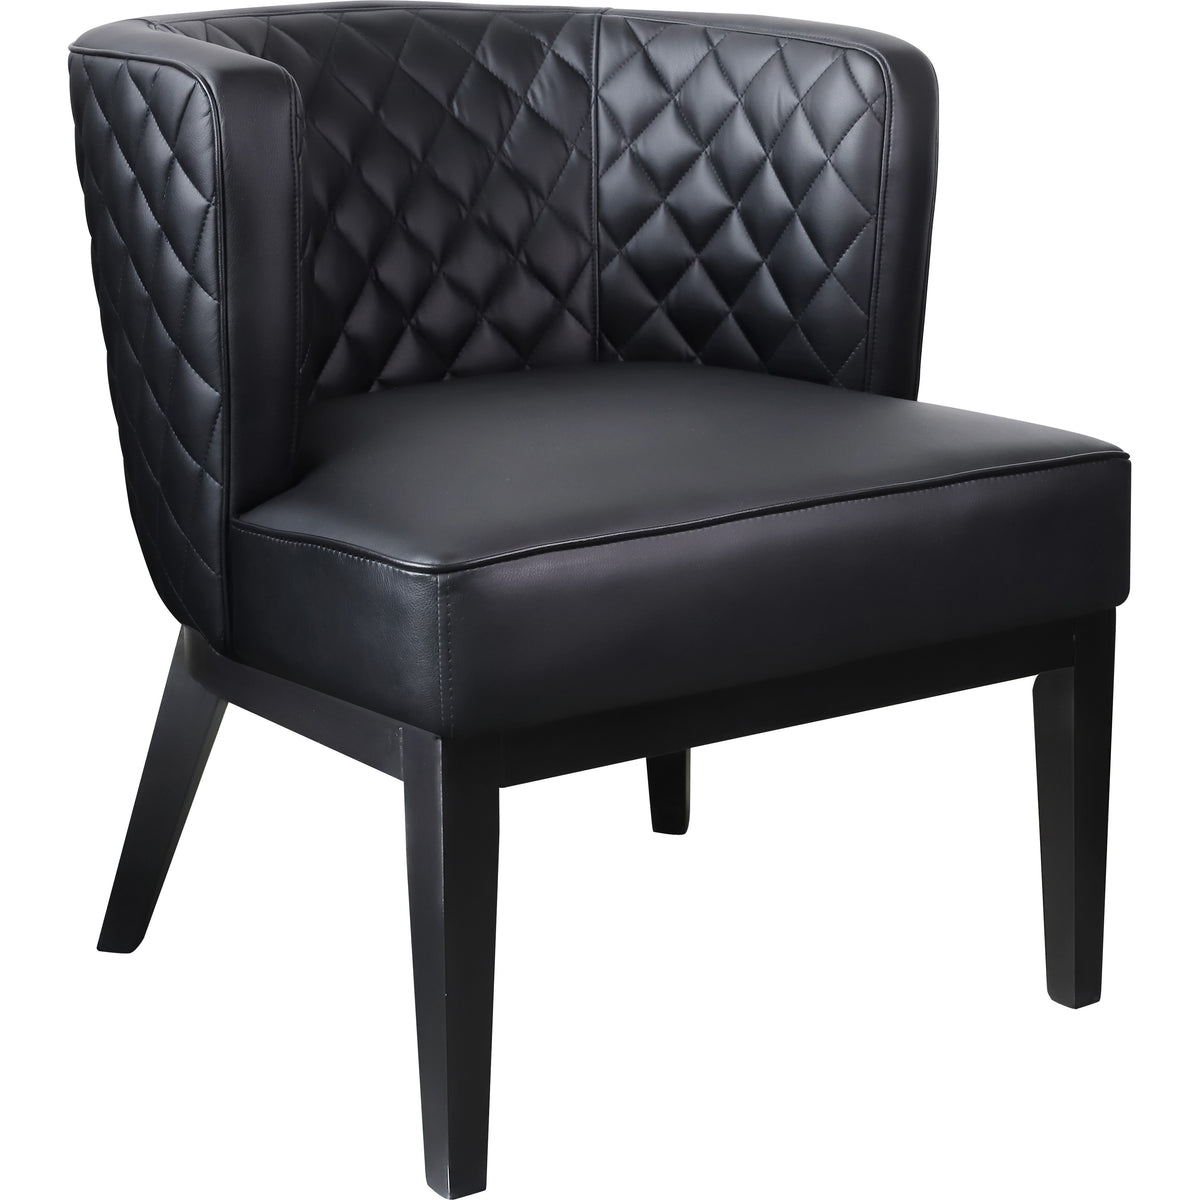 Ava Quilted guest, accent or dining chair - Black, B529QBK-BK